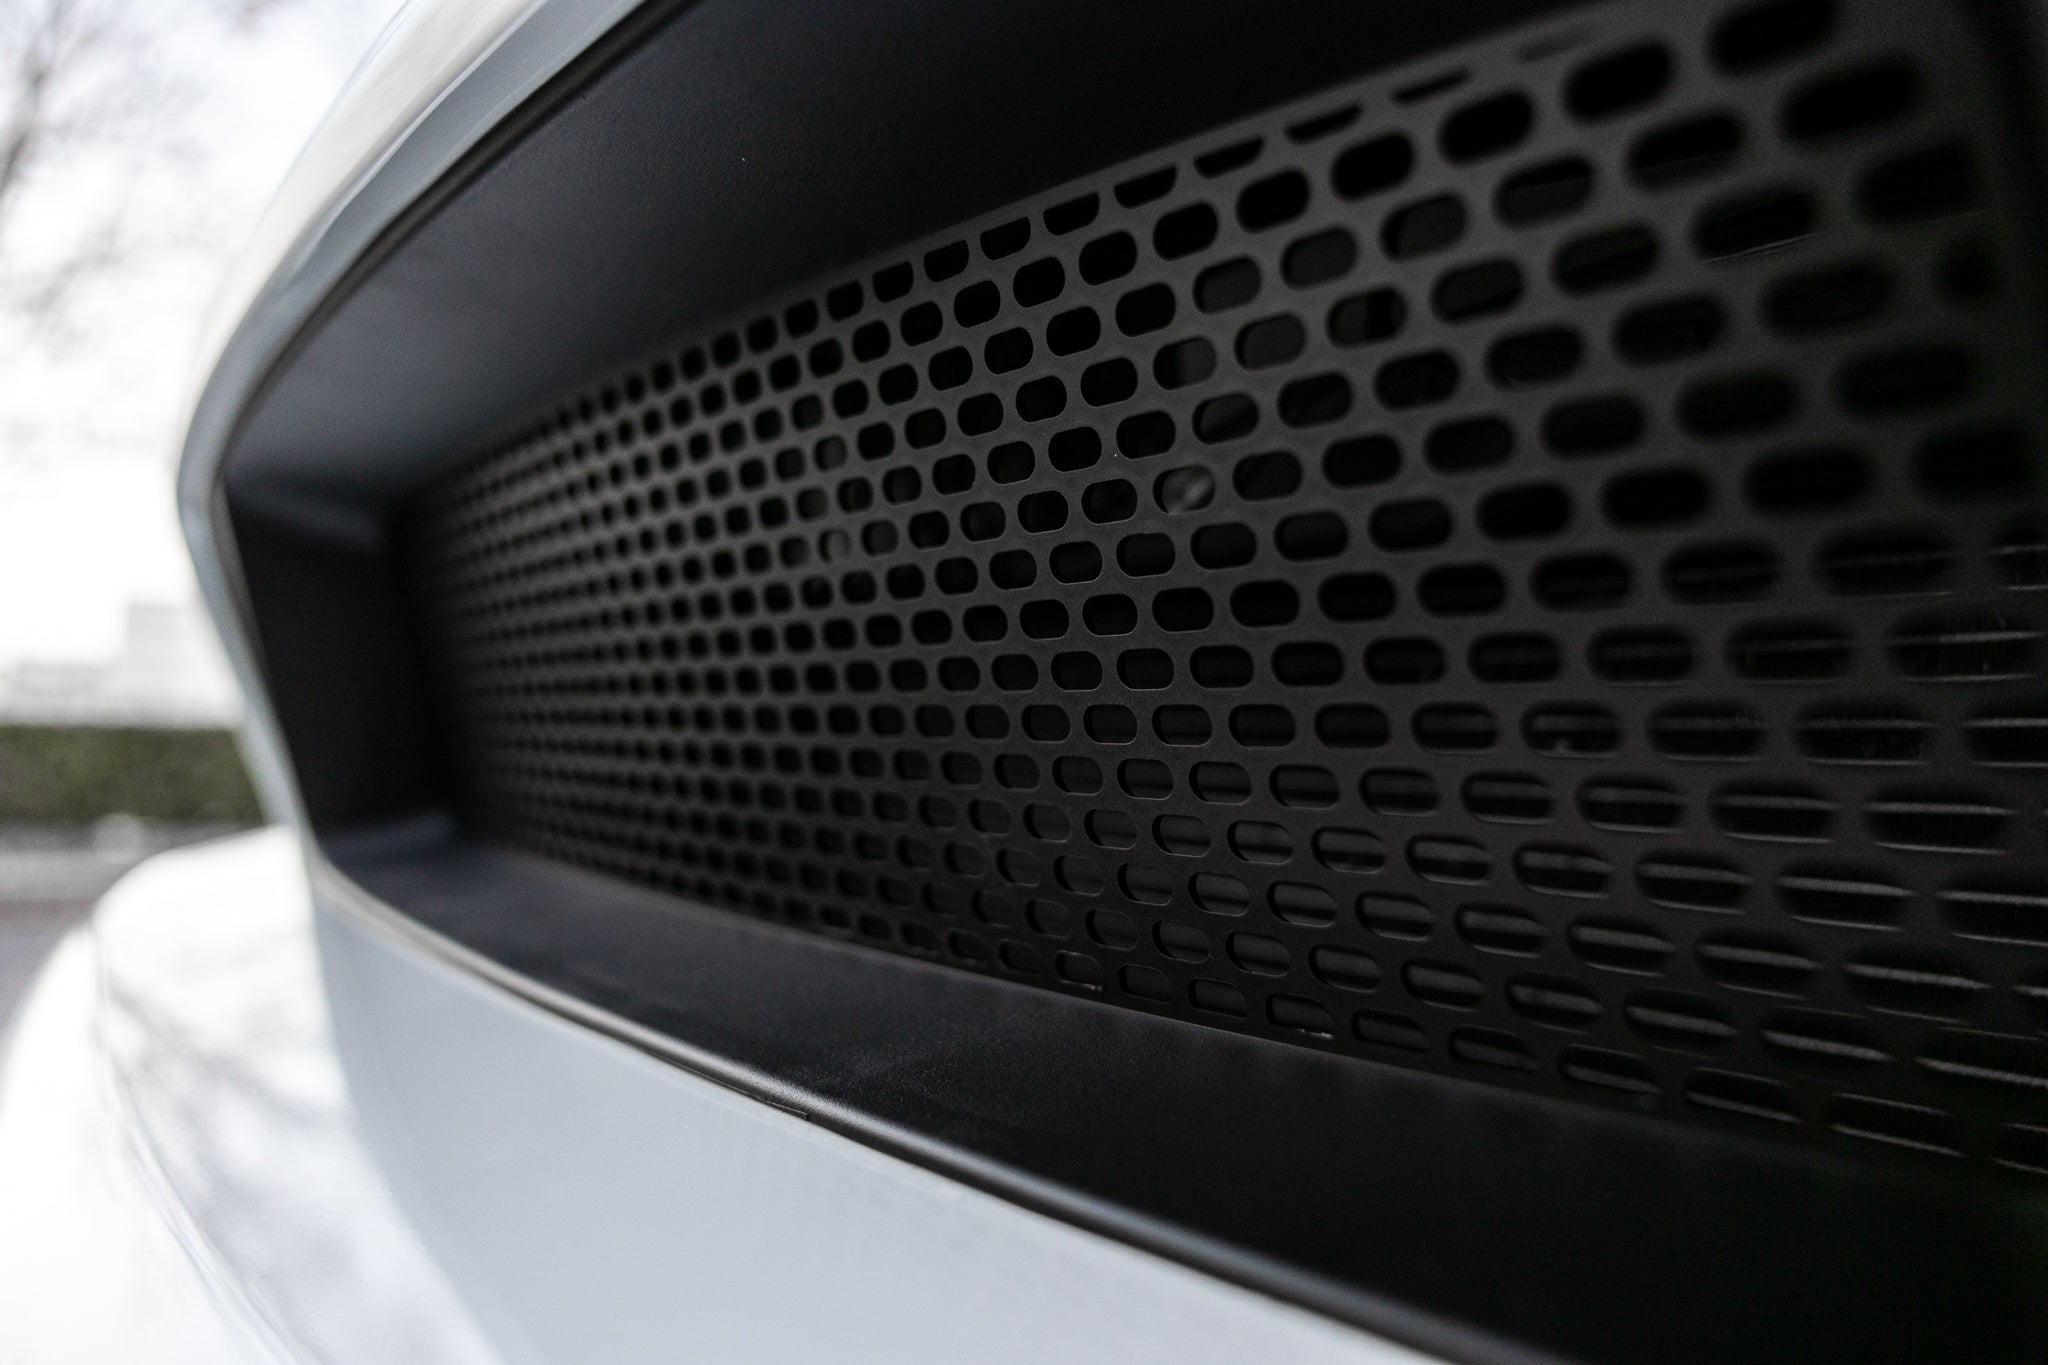 Close-up of black RTR Upper and Lower Grille for 13-14 Mustang GT/V6, featuring modern aggressive styling with pill patterned vents for increased airflow and performance.